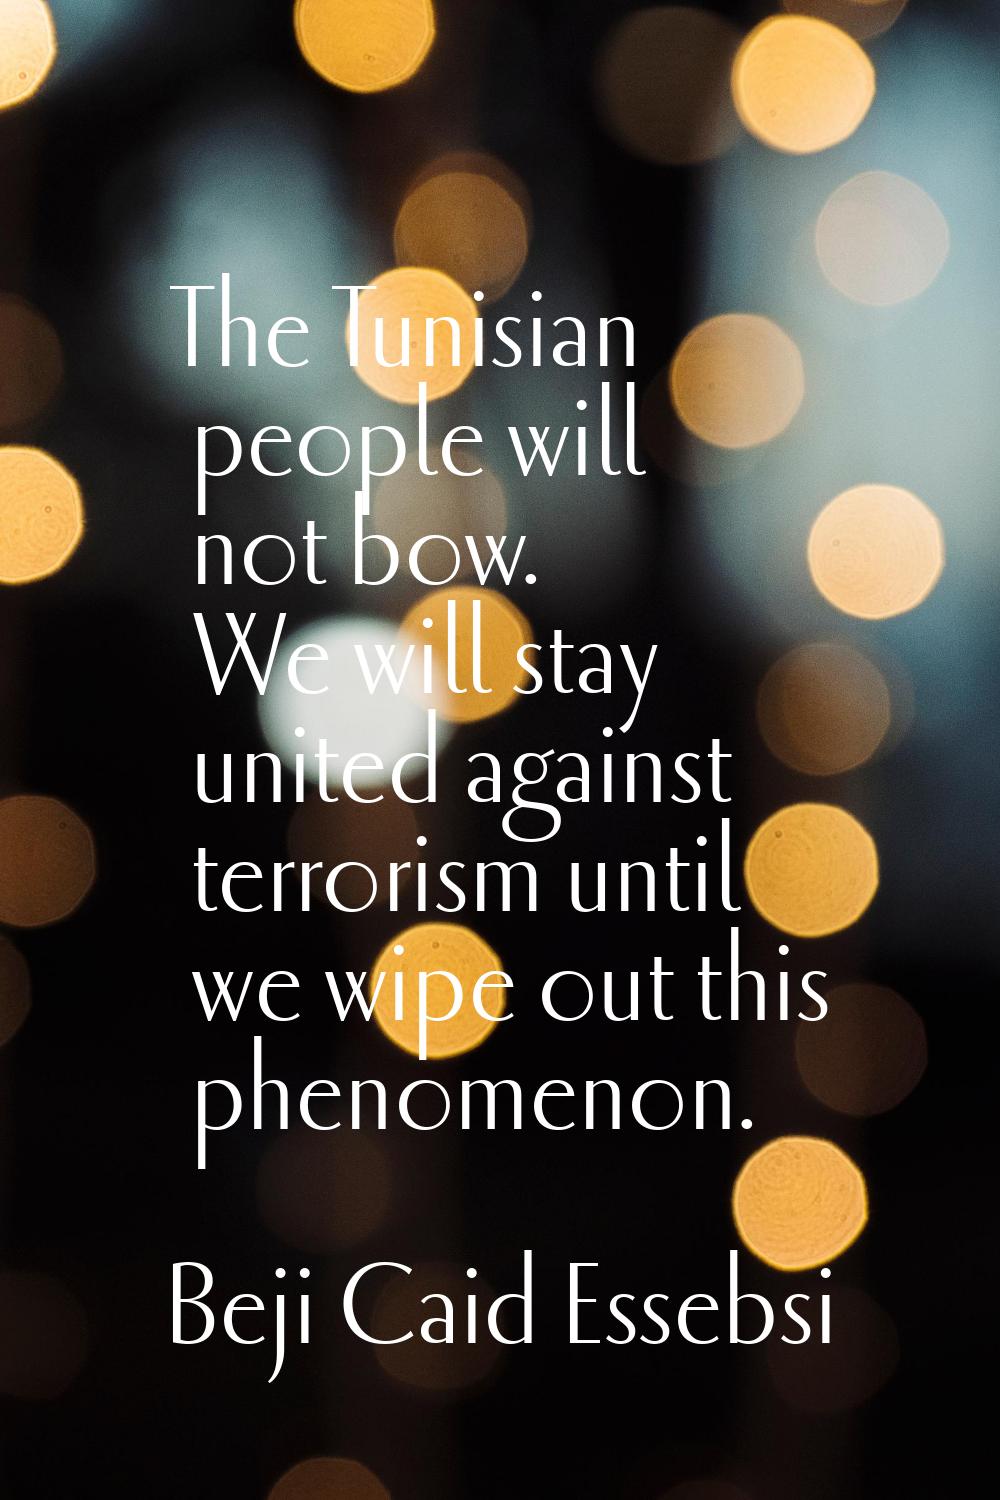 The Tunisian people will not bow. We will stay united against terrorism until we wipe out this phen